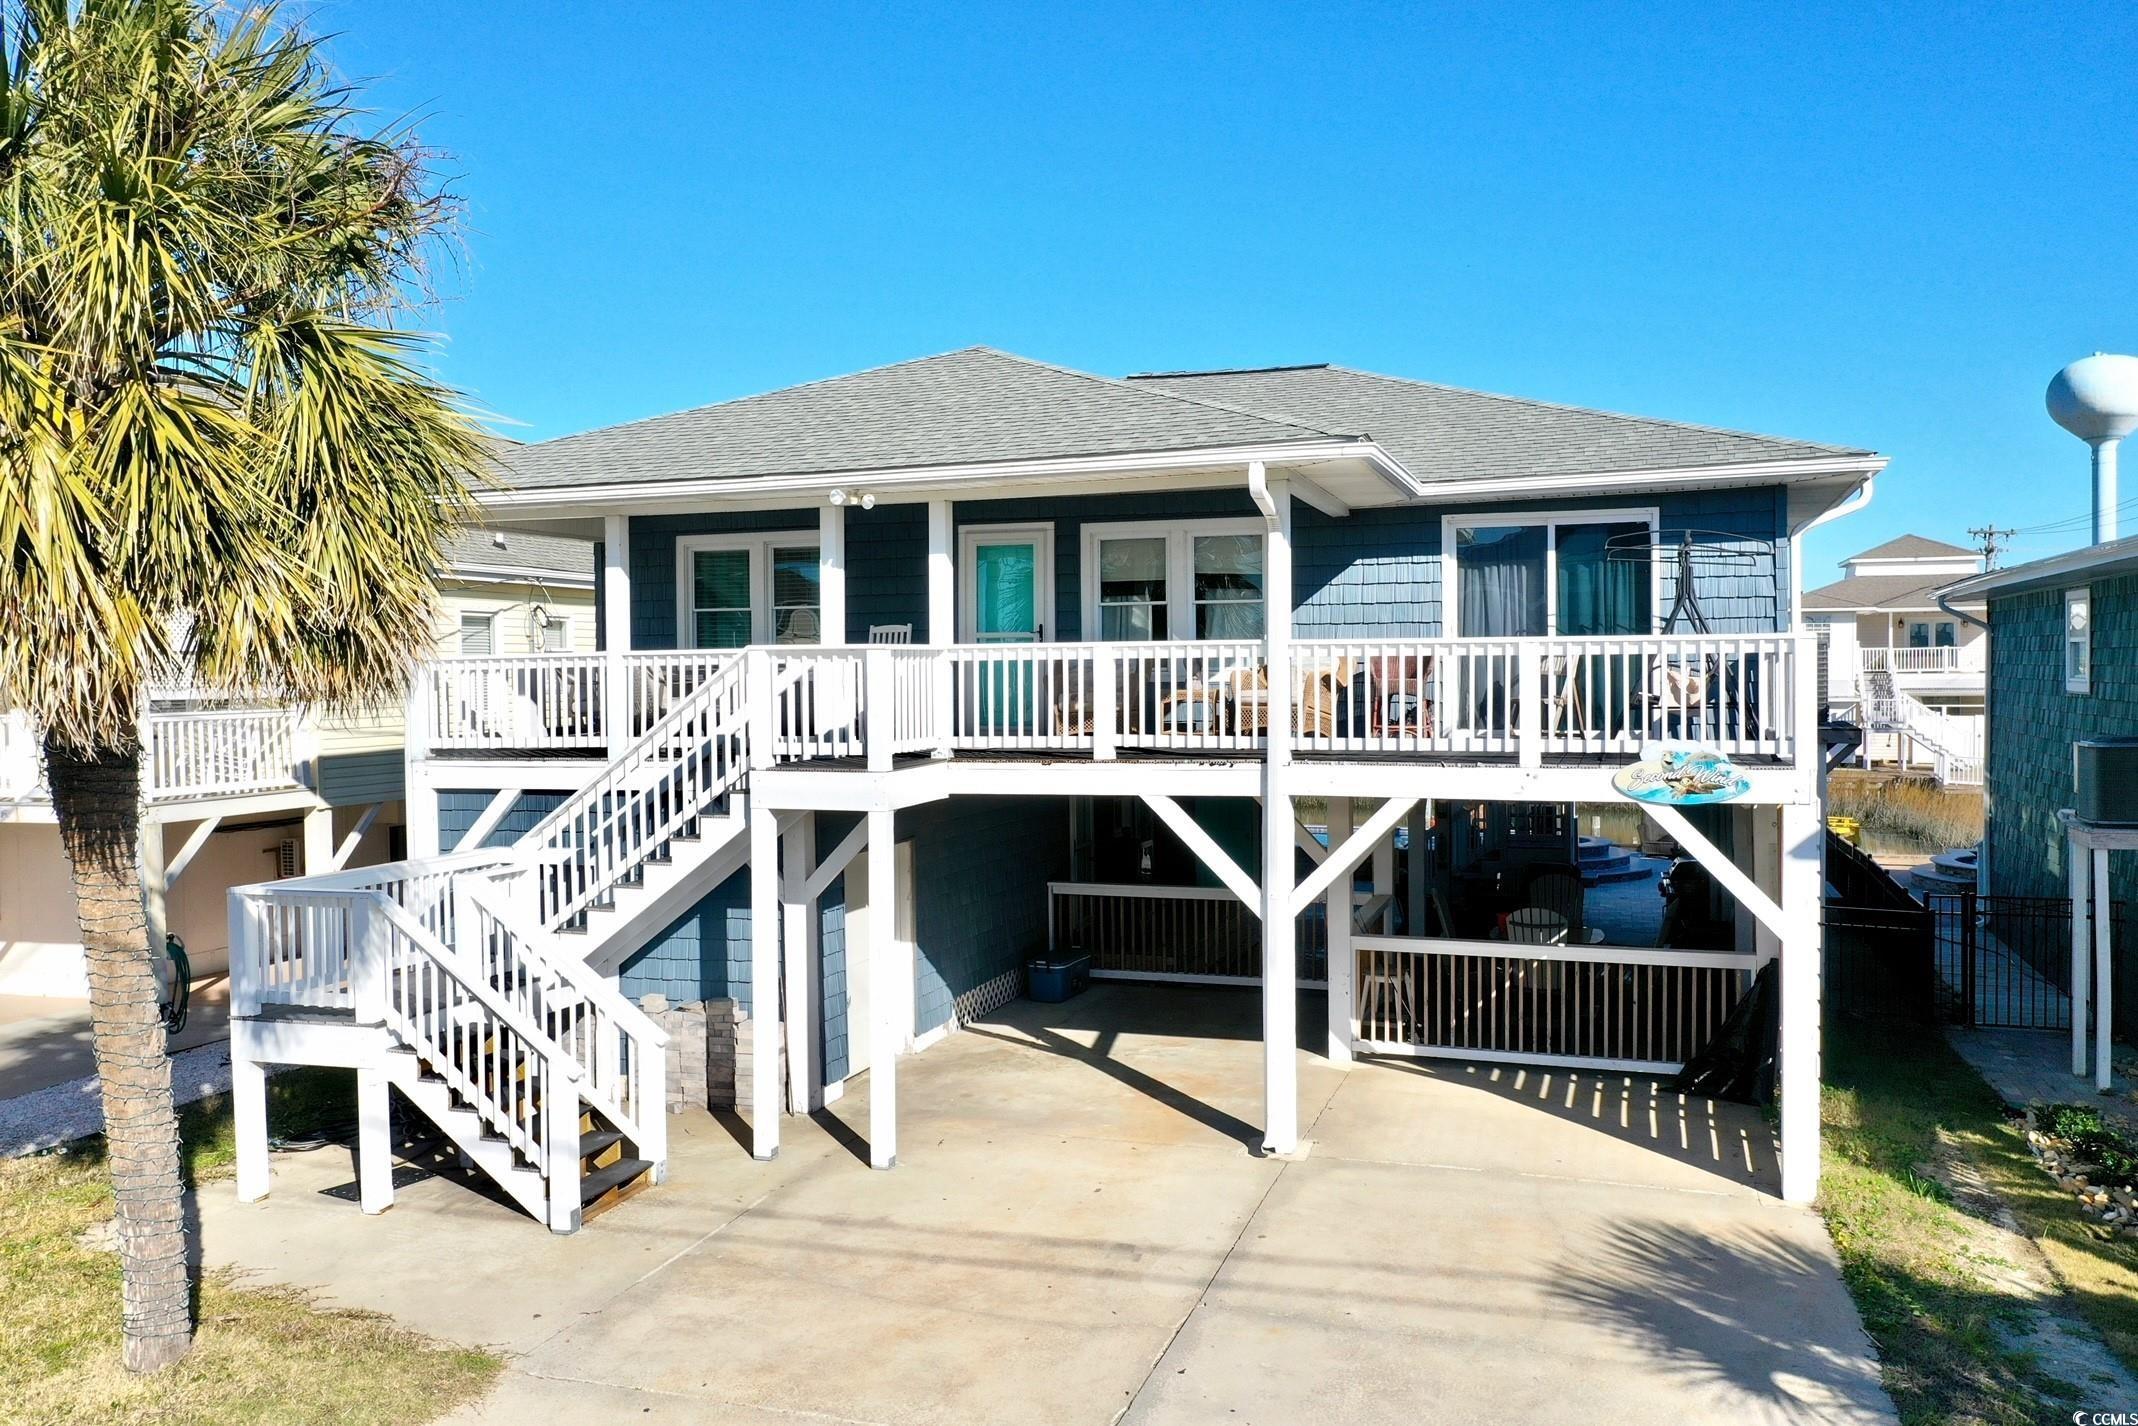 back on market! no fault to seller! beautifully updated and furnished beach home, just 1 block from the beach! this home is located in the channels of cherry grove, which is a section of north myrtle beach, sc. the layout of this home is 3 bedrooms and 2 full bathrooms upstairs, 2 bedrooms, 1 full bathroom, and a half bathroom downstairs. the 2 downstairs bedrooms are similar to "lock out units" each equipped with their own private entry and bathrooms. brand new saltwater pool, that can be heated or cooled. along with a fenced in yard and a floating dock! there is laundry and an outdoor shower downstairs for your convenience! plenty of room for entertainment! this raised beach home is ideal for several purposes such as, rental property, family vacation home, or a wonderful primary residence where you could enjoy the beach life! buyer is responsible for all measurement verifications.